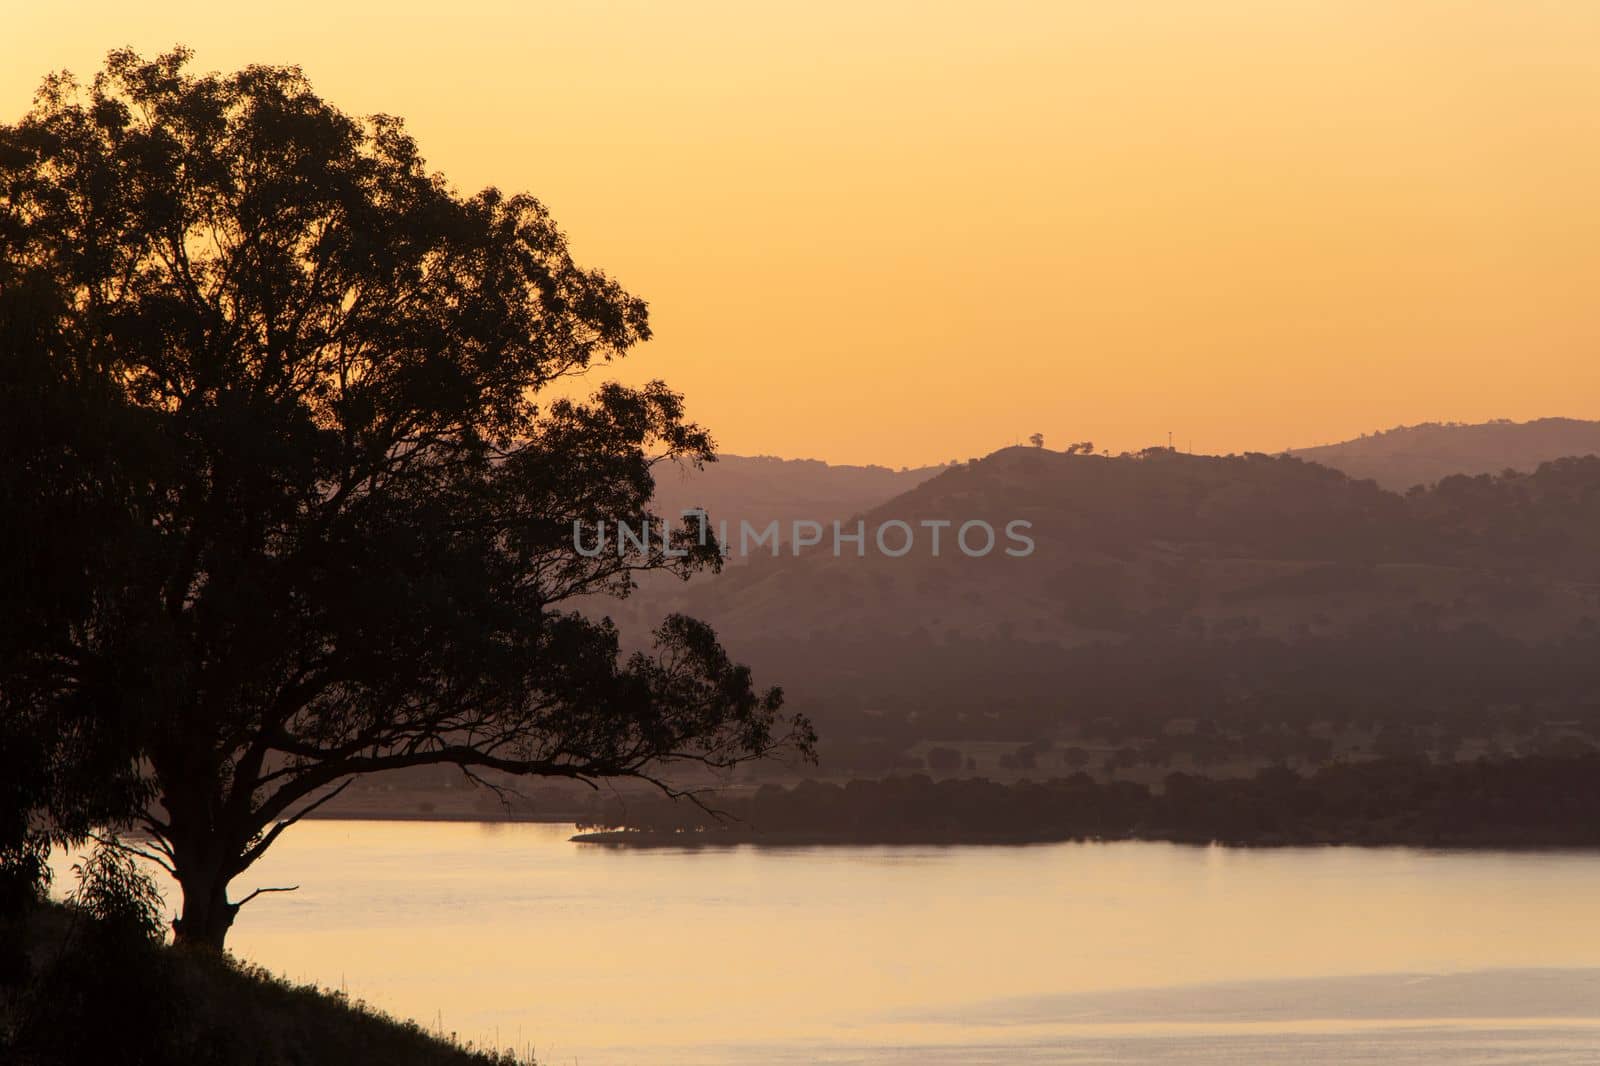 This stunning image captures the tranquil beauty of a sunset over Lake Hume, Victoria, with a striking silhouette of a tree. Perfect for use in advertising, websites, or as wall art for nature lovers.